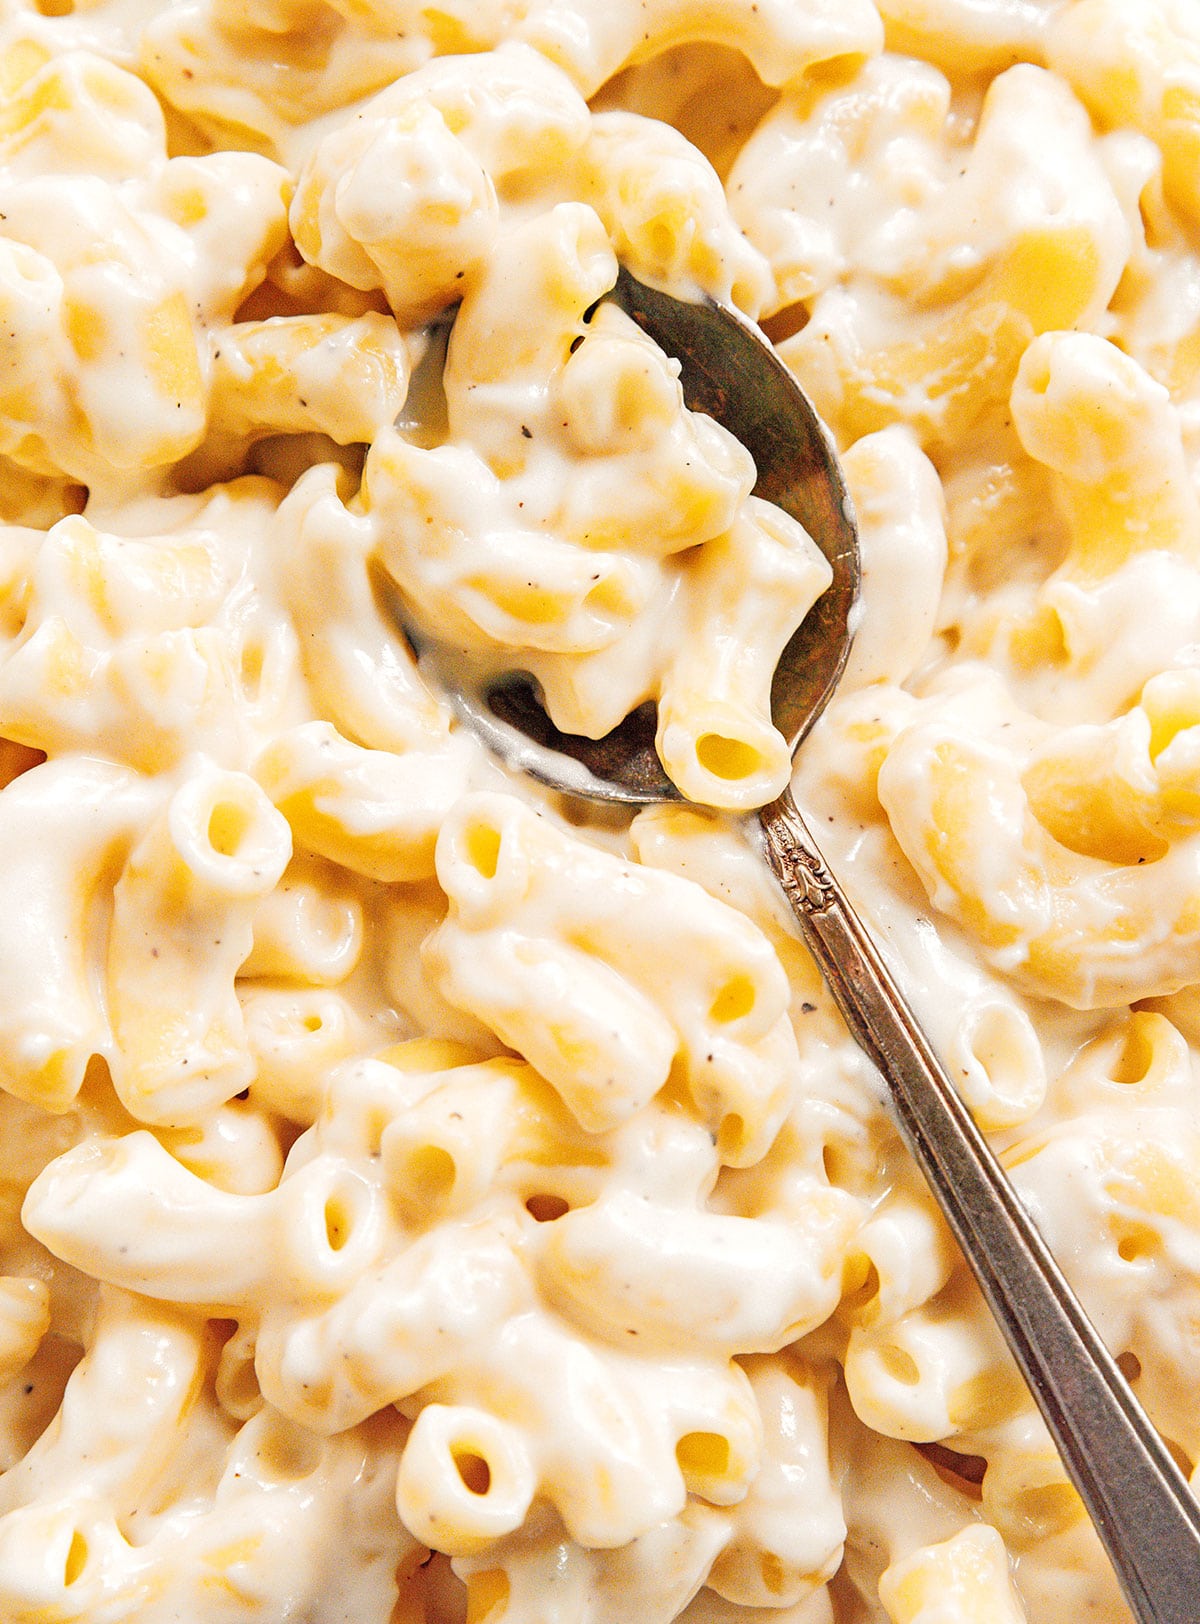 A close up view detailing the texture and creaminess of truffle macaroni and cheese